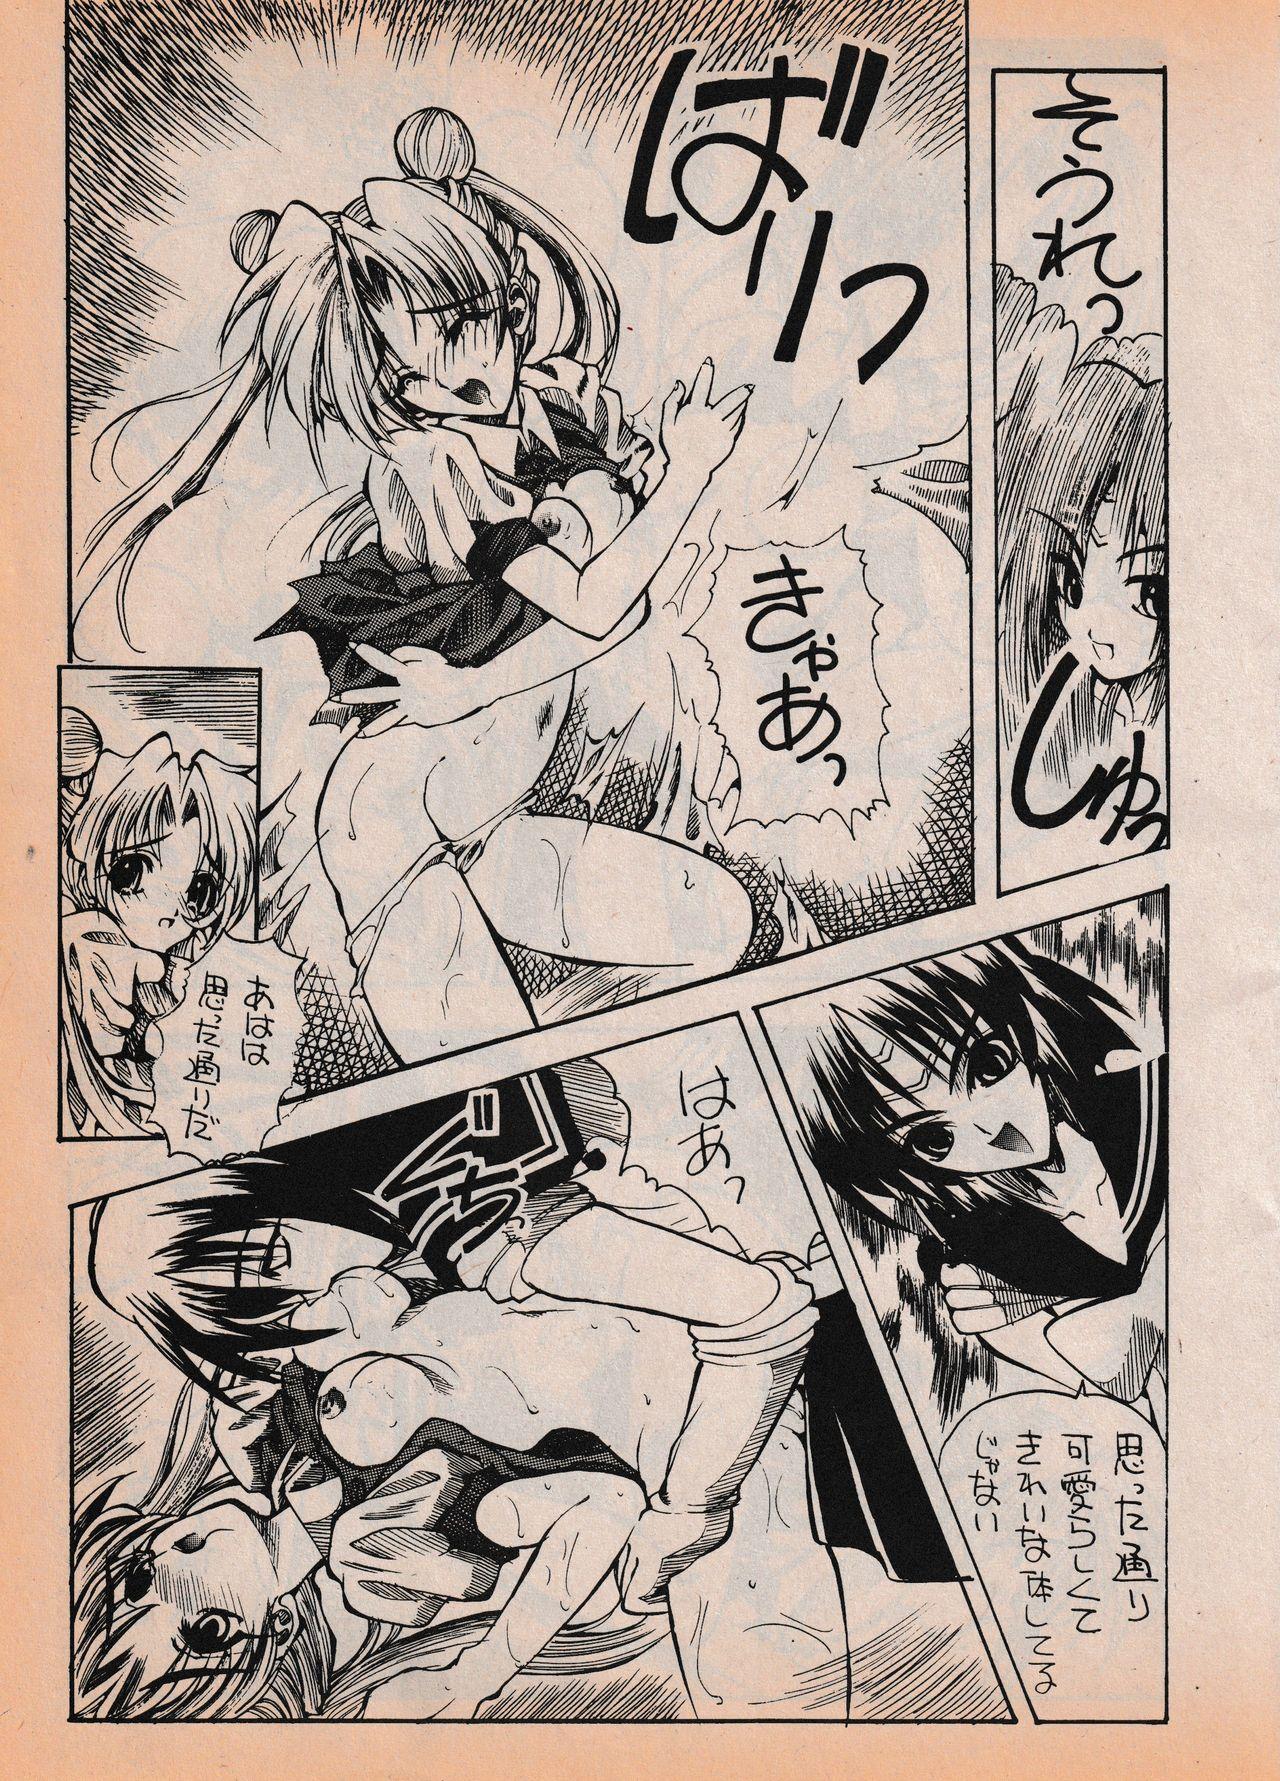 Sailor X vol. 7 - The Kama Sutra Of Pain 29